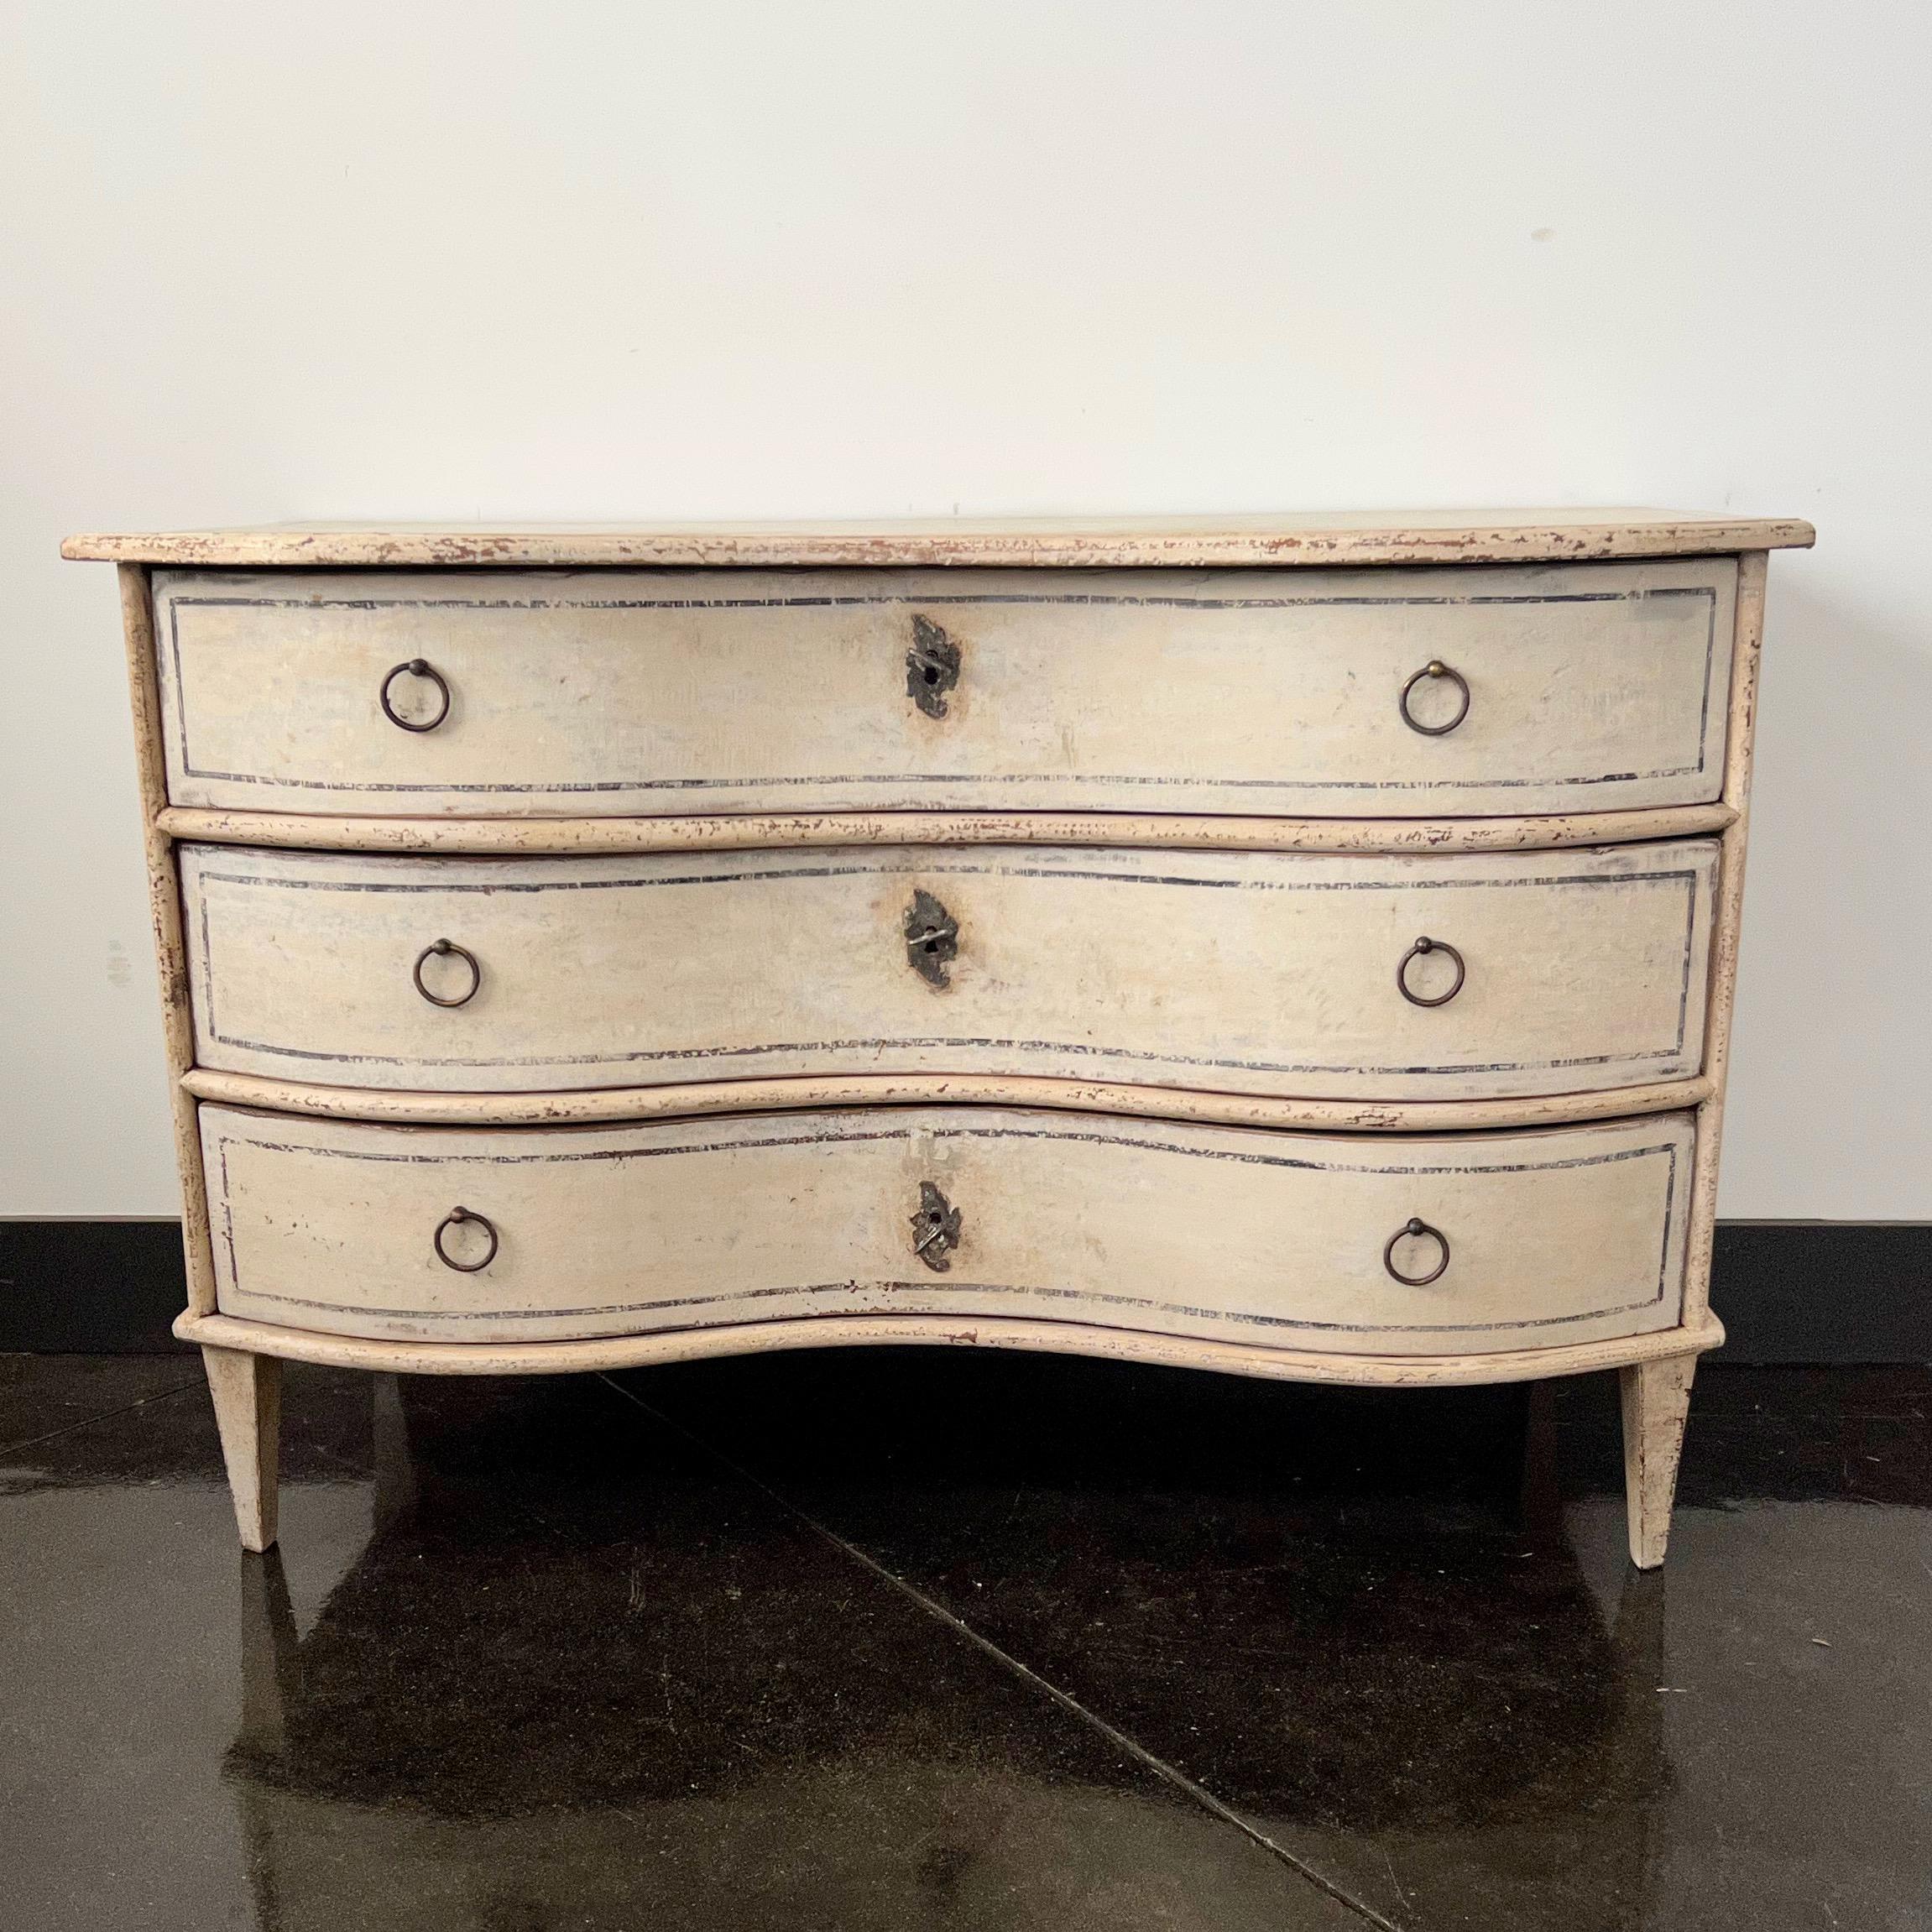 18th Century German Baroque painted chest of drawers with serpentine front drawers on tapered feet in later paint.